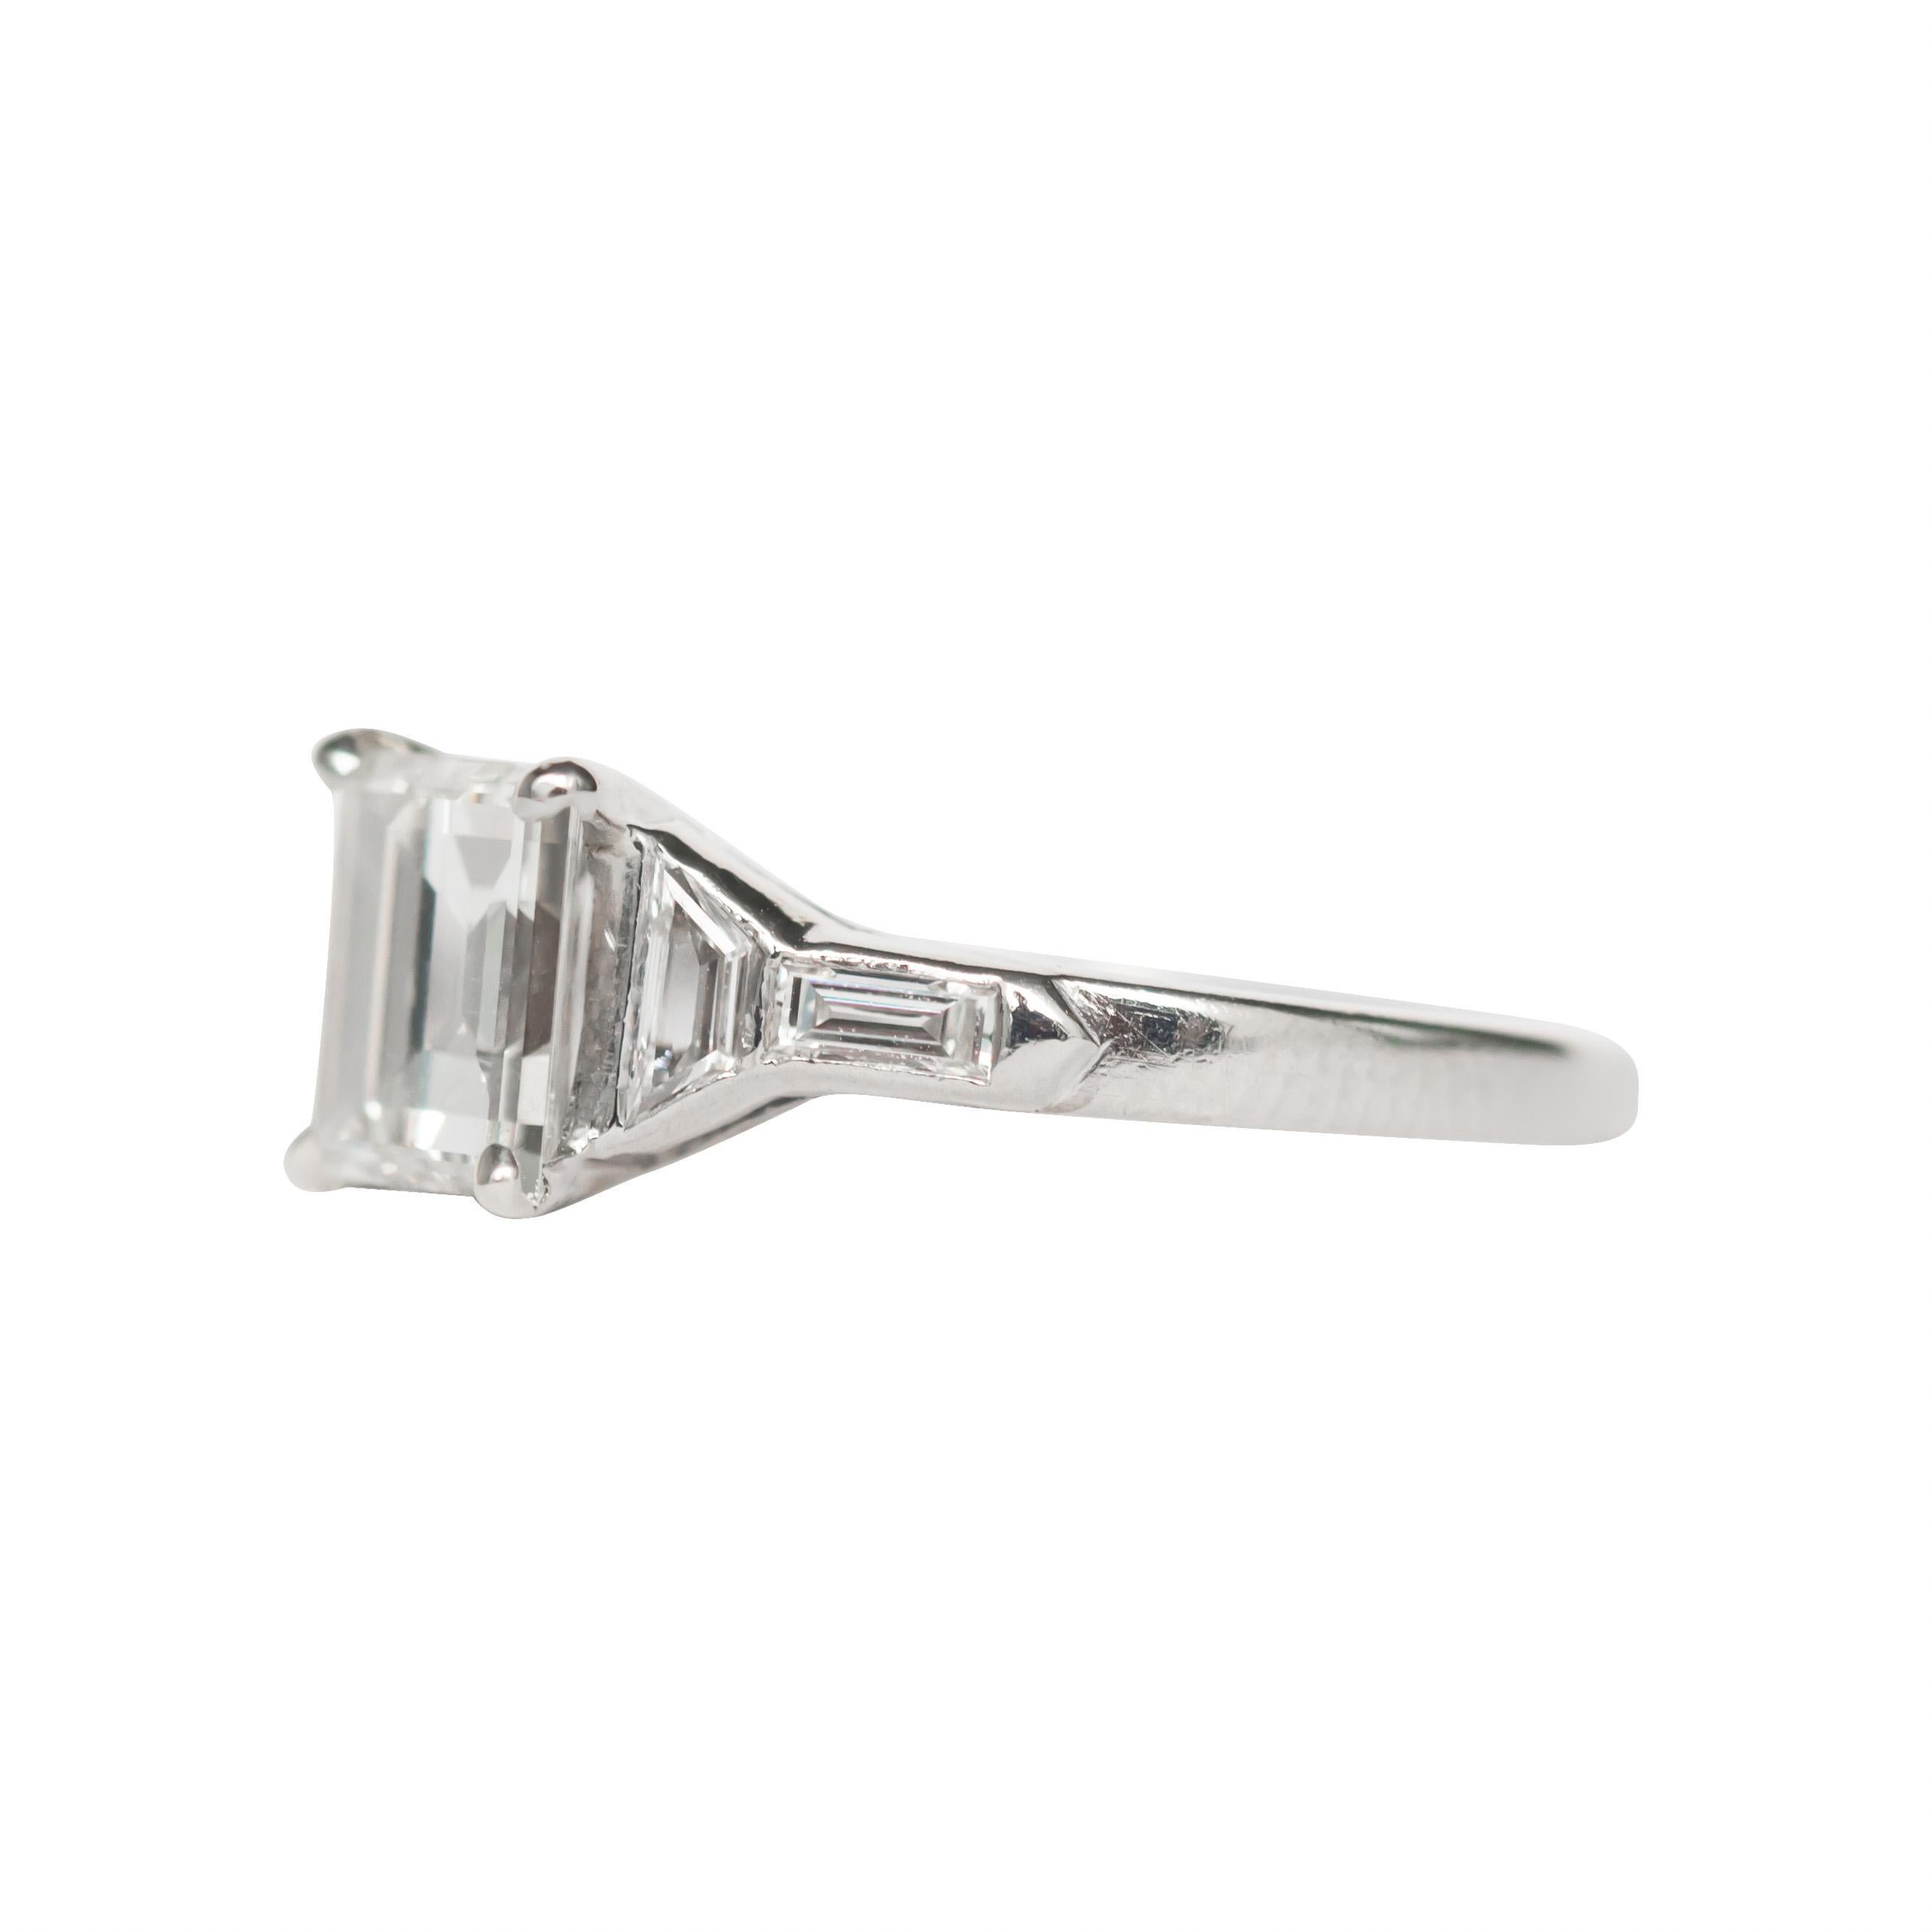 Ring Size: 7.25
Metal Type: Platinum [Hallmarked, and Tested]
Weight:  3.8 grams

Center Diamond Details:
Weight: 1.25 carat 
Cut: Carre Cut
Color: I
Clarity: SI2

Side Diamond Details:  
Shape: Straight Baguette and Hexagonal Step Cut 
Carat: .50